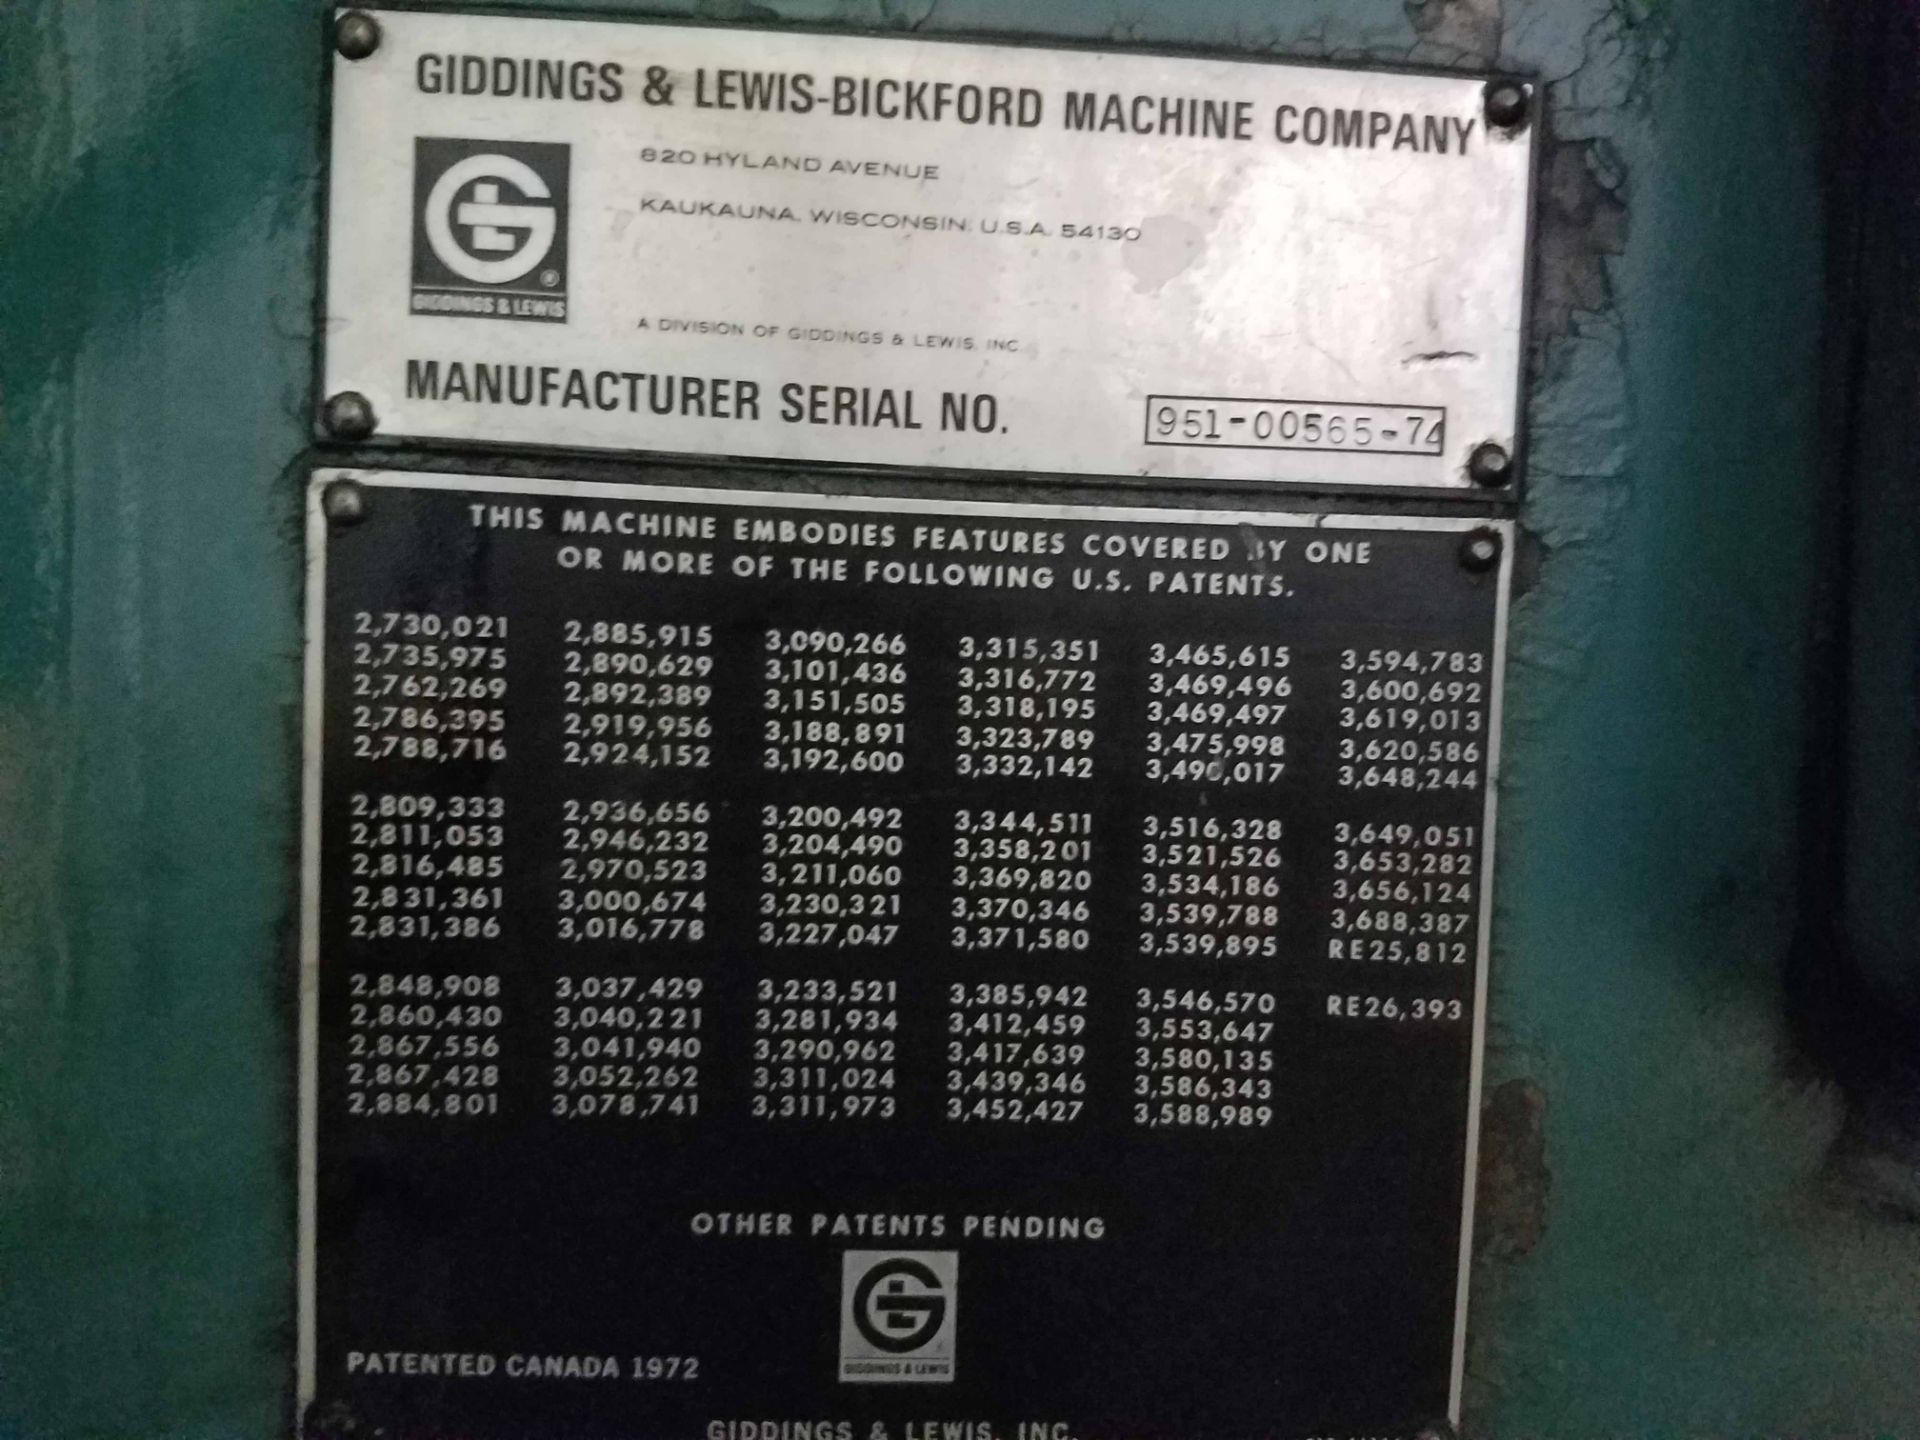 RADIAL ARM DRILL, 3' X 9" GIDDINGS & LEWIS BICKFORD, Chipmaster, S/N 951-00565-74. (Location BB: - Image 4 of 4